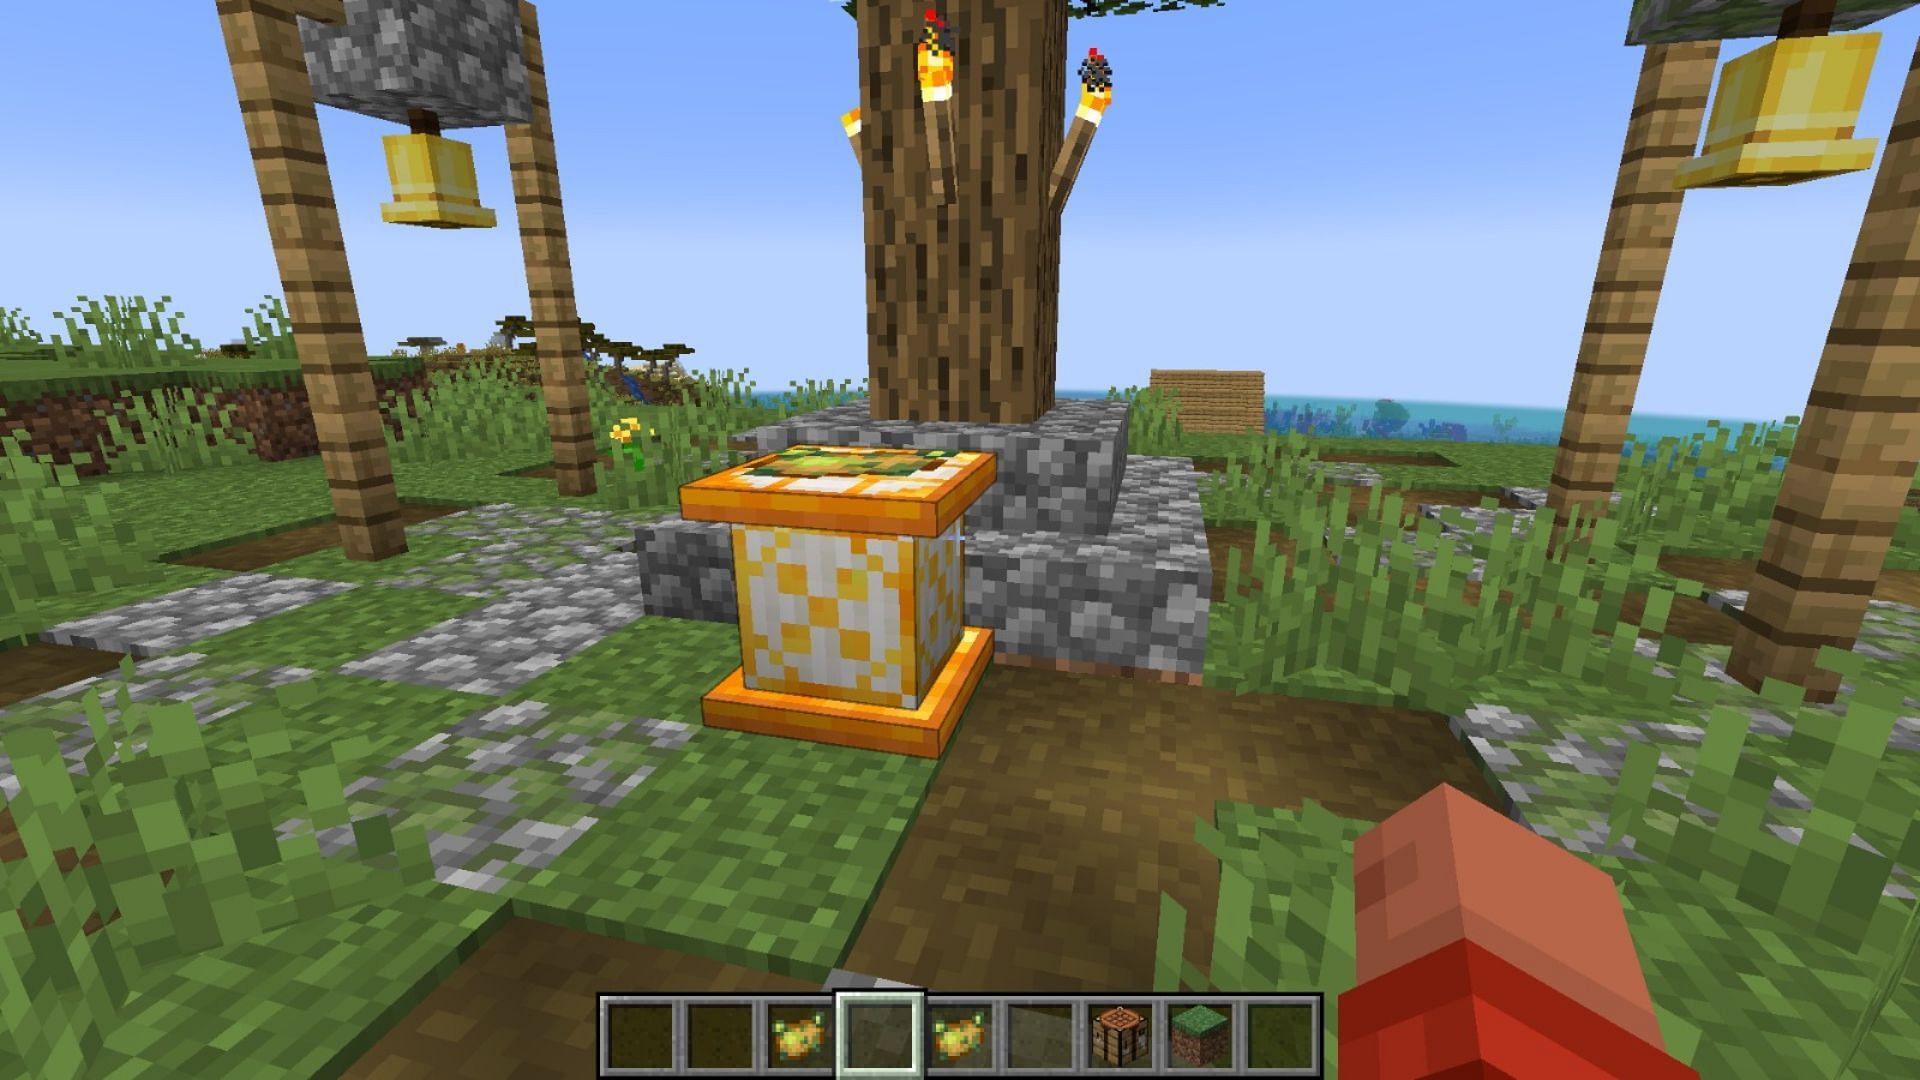 The pedestal can be found in villages (Image via Mojang Studios)